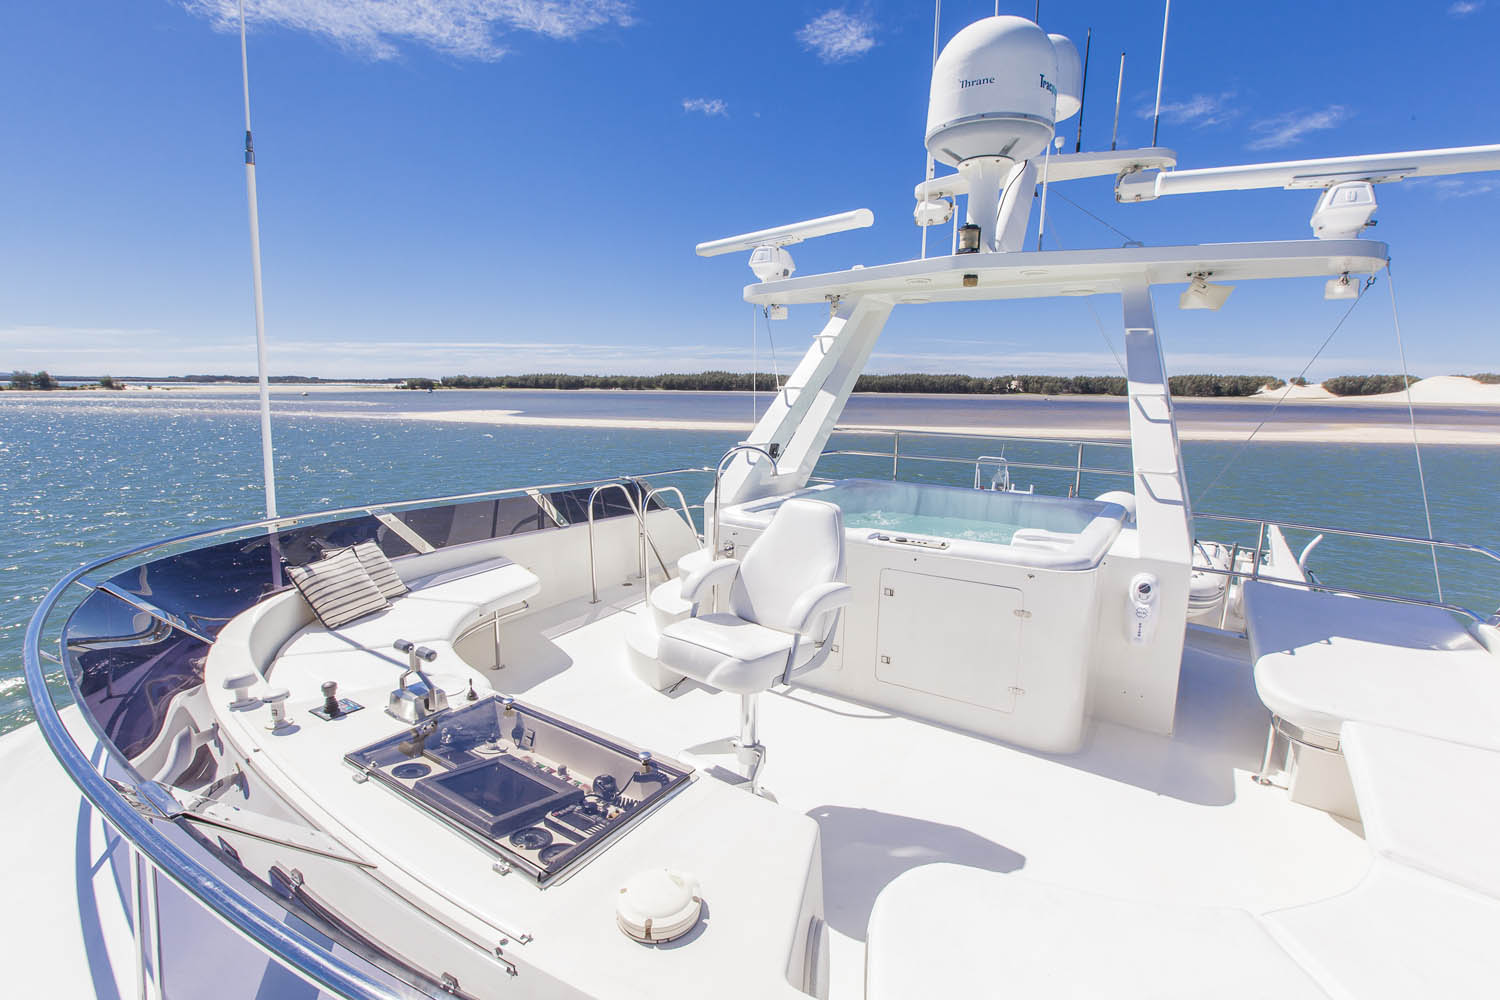 silent world yacht for sale